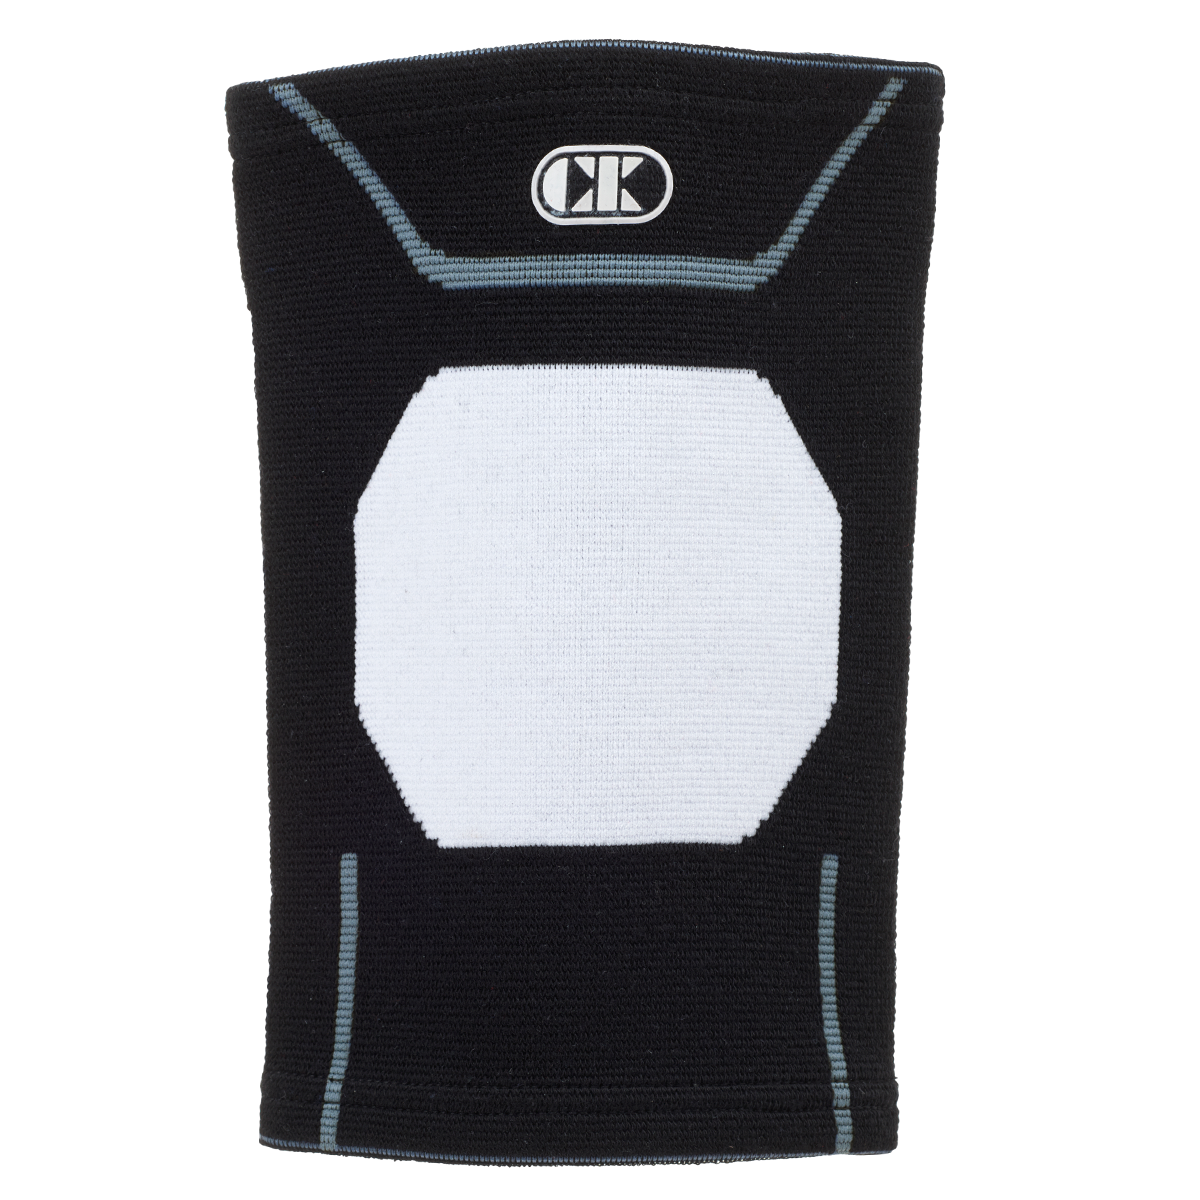 The Cliff Keen Sure Shot Compression Sleeve